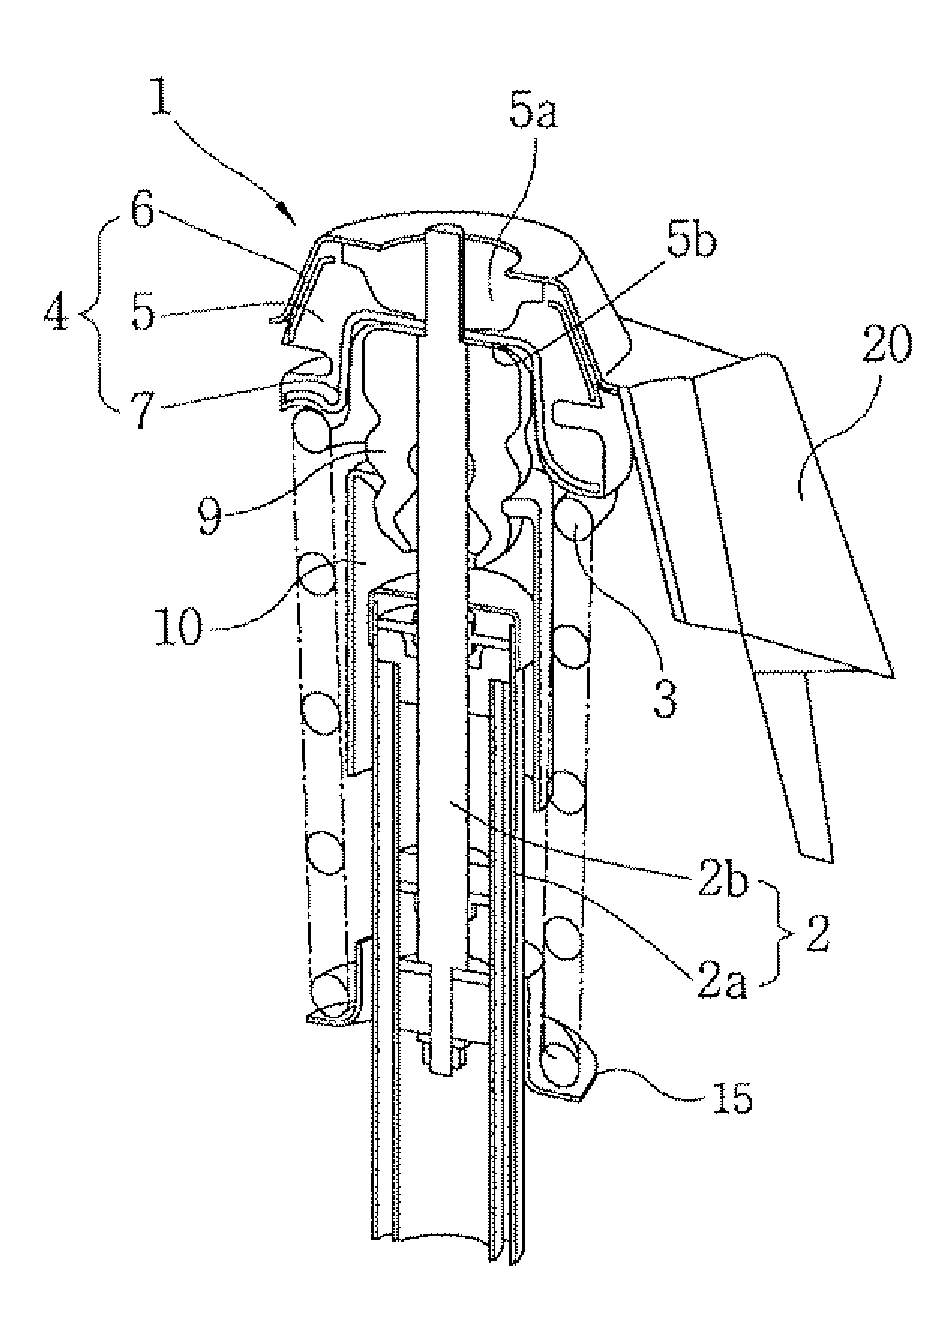 Integrated insulator type strut assembly for suspension system